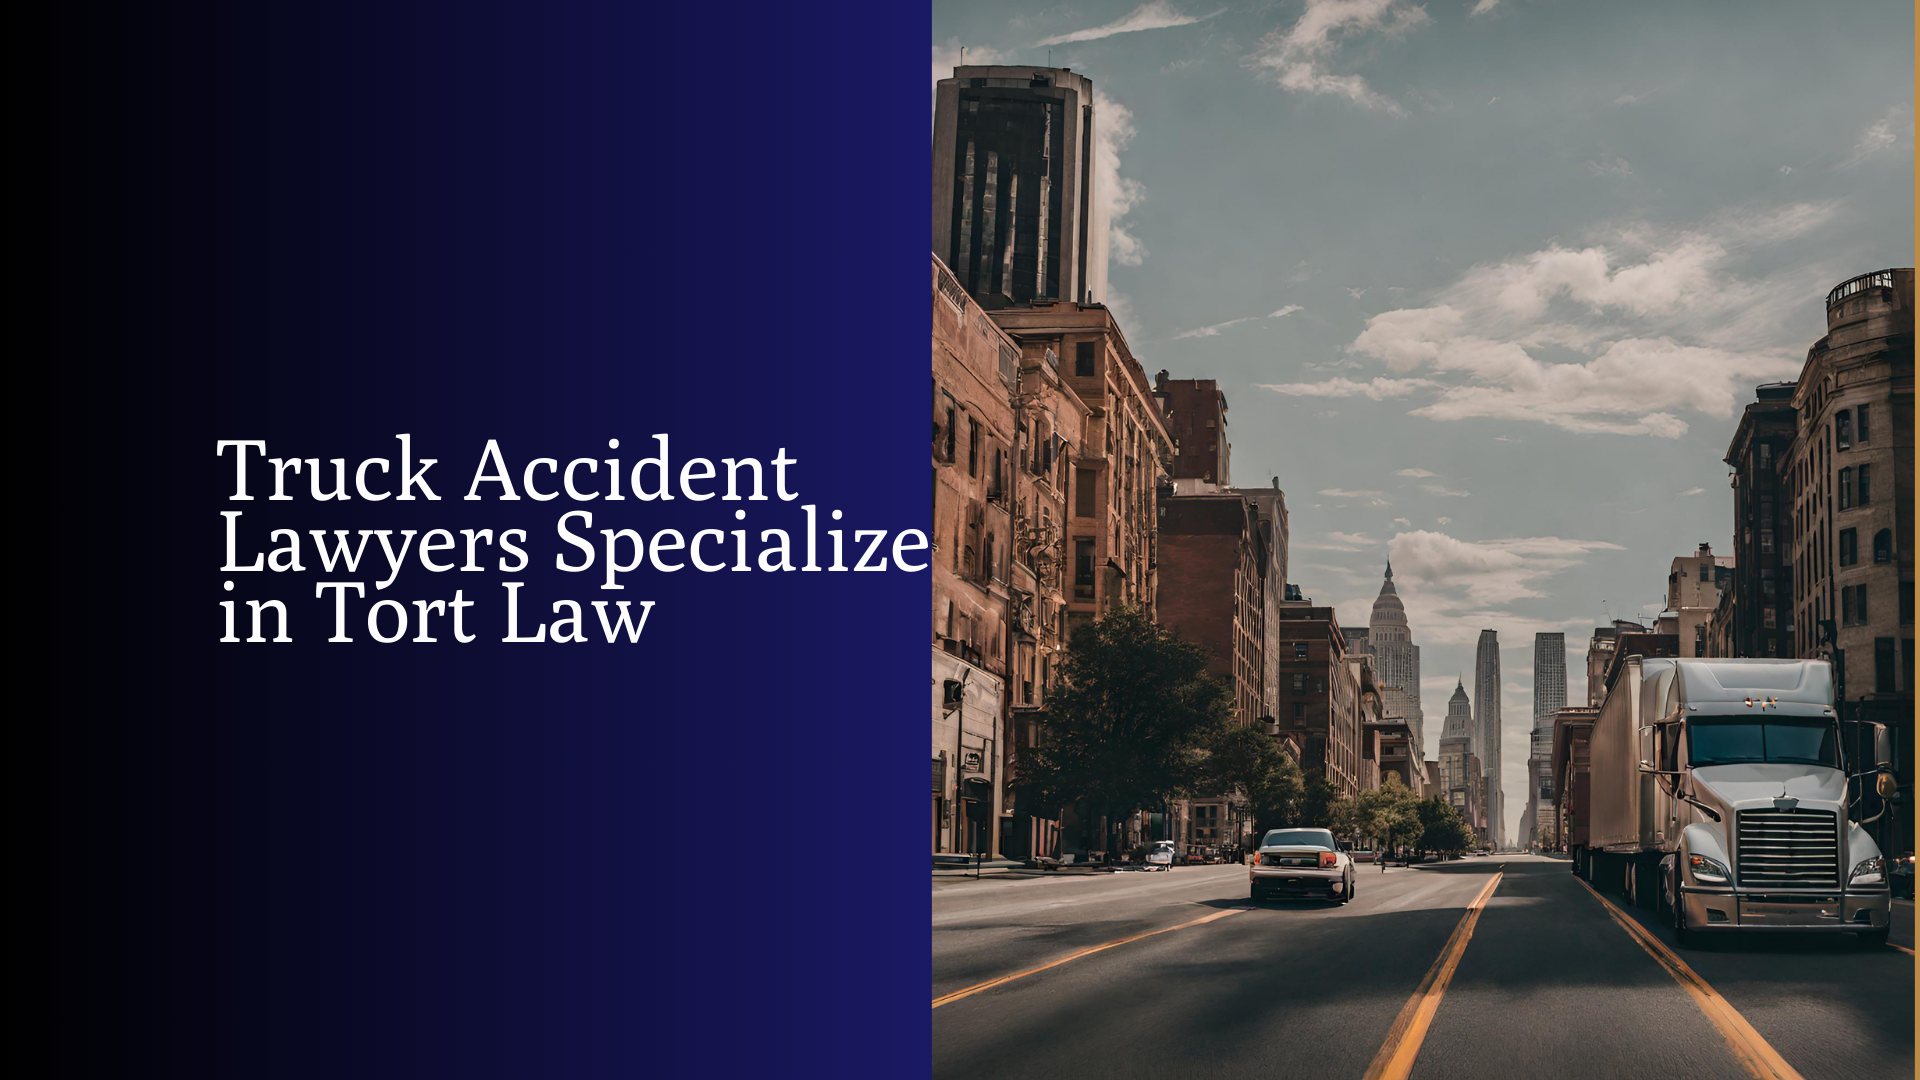 Truck-Accident-Lawyers-Specialize-in-Tort-Law